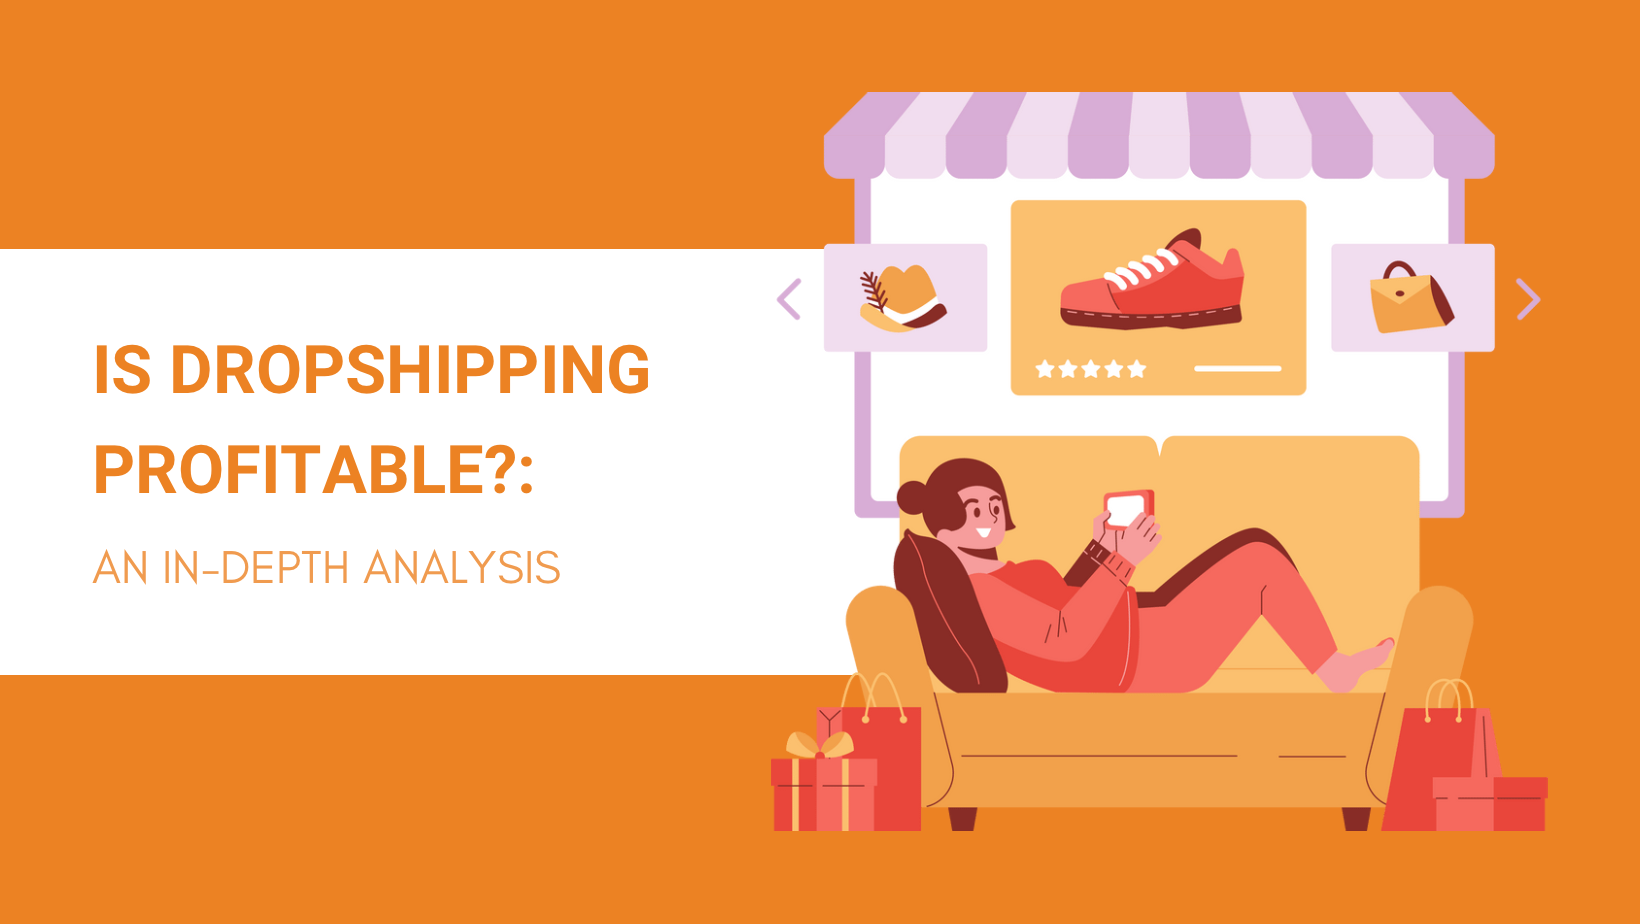 IS DROPSHIPPING PROFITABLE AN IN-DEPTH ANALYSIS